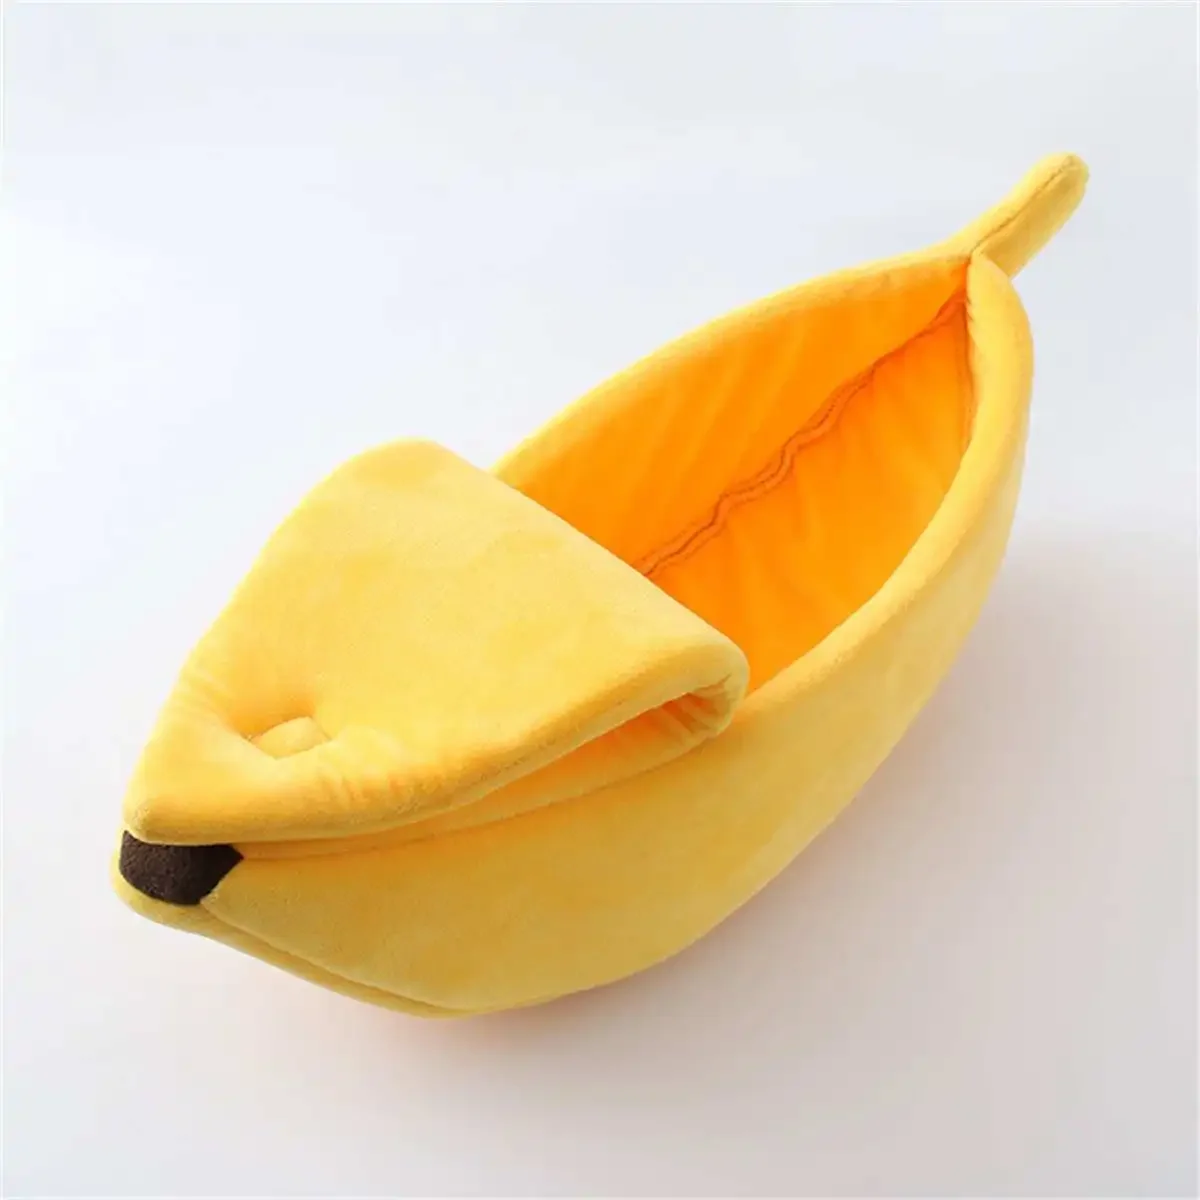 

Dog Cushion Cat Supplies Funny Banana Shape Cat Bed House Cute Cozy Cat Mat Soft Fluffy Warm Durable Portable Pet Basket Kennel